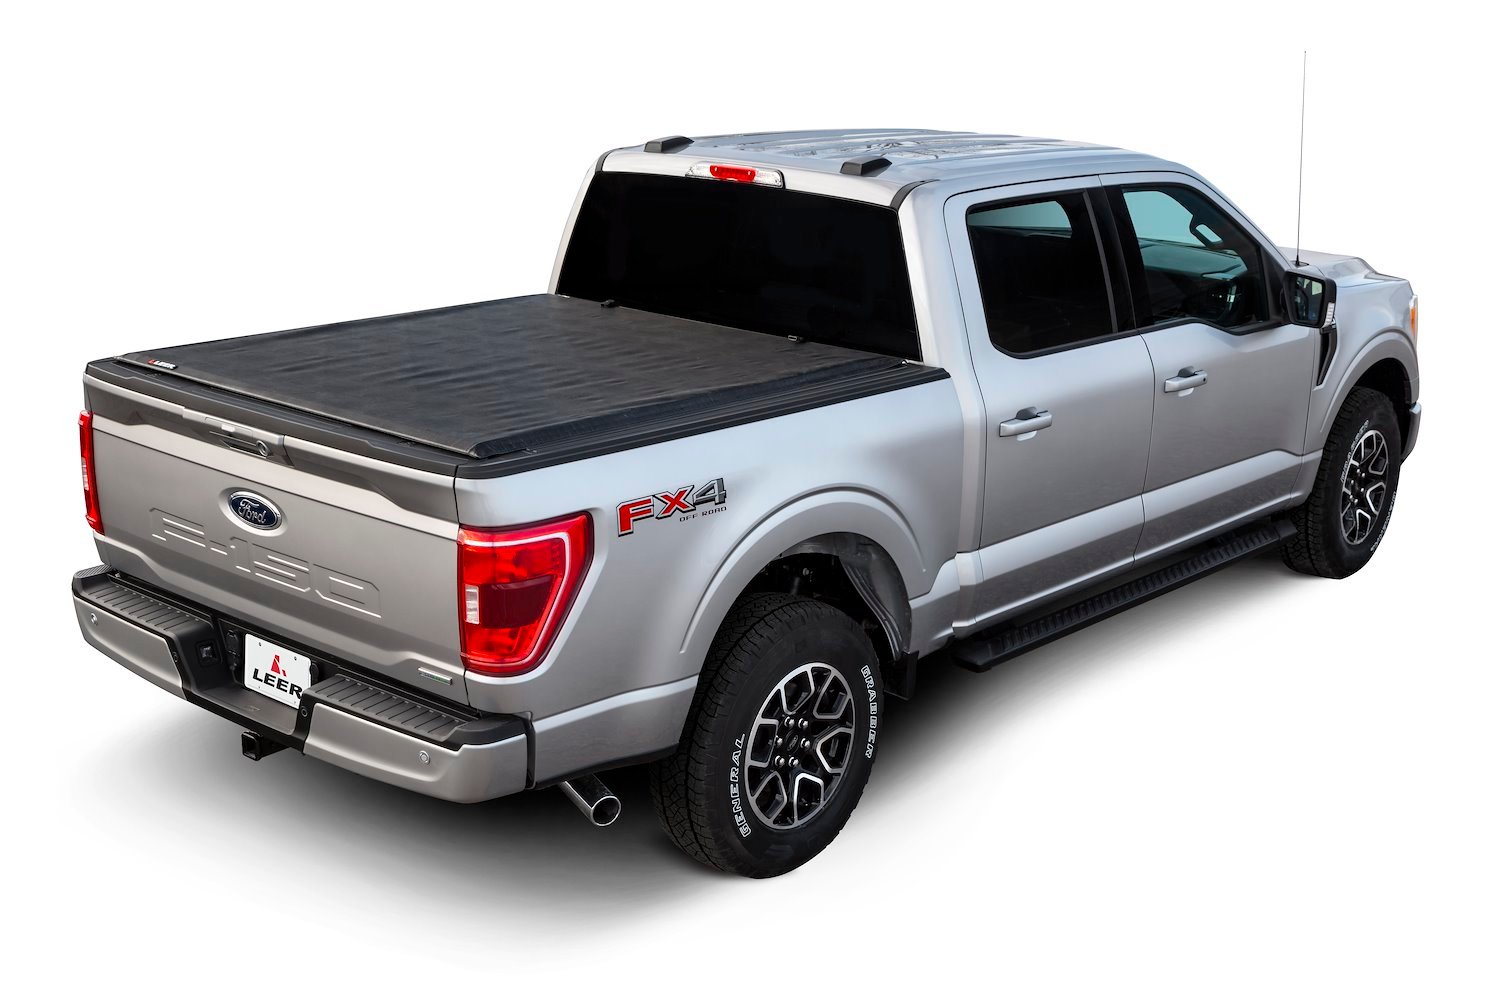 SR250 Soft Rolling Tonneau Cover Fits Select Chevrolet Silverado 1500/GMC Sierra 1500 [Bed Length: 5 ft. 8 in.]